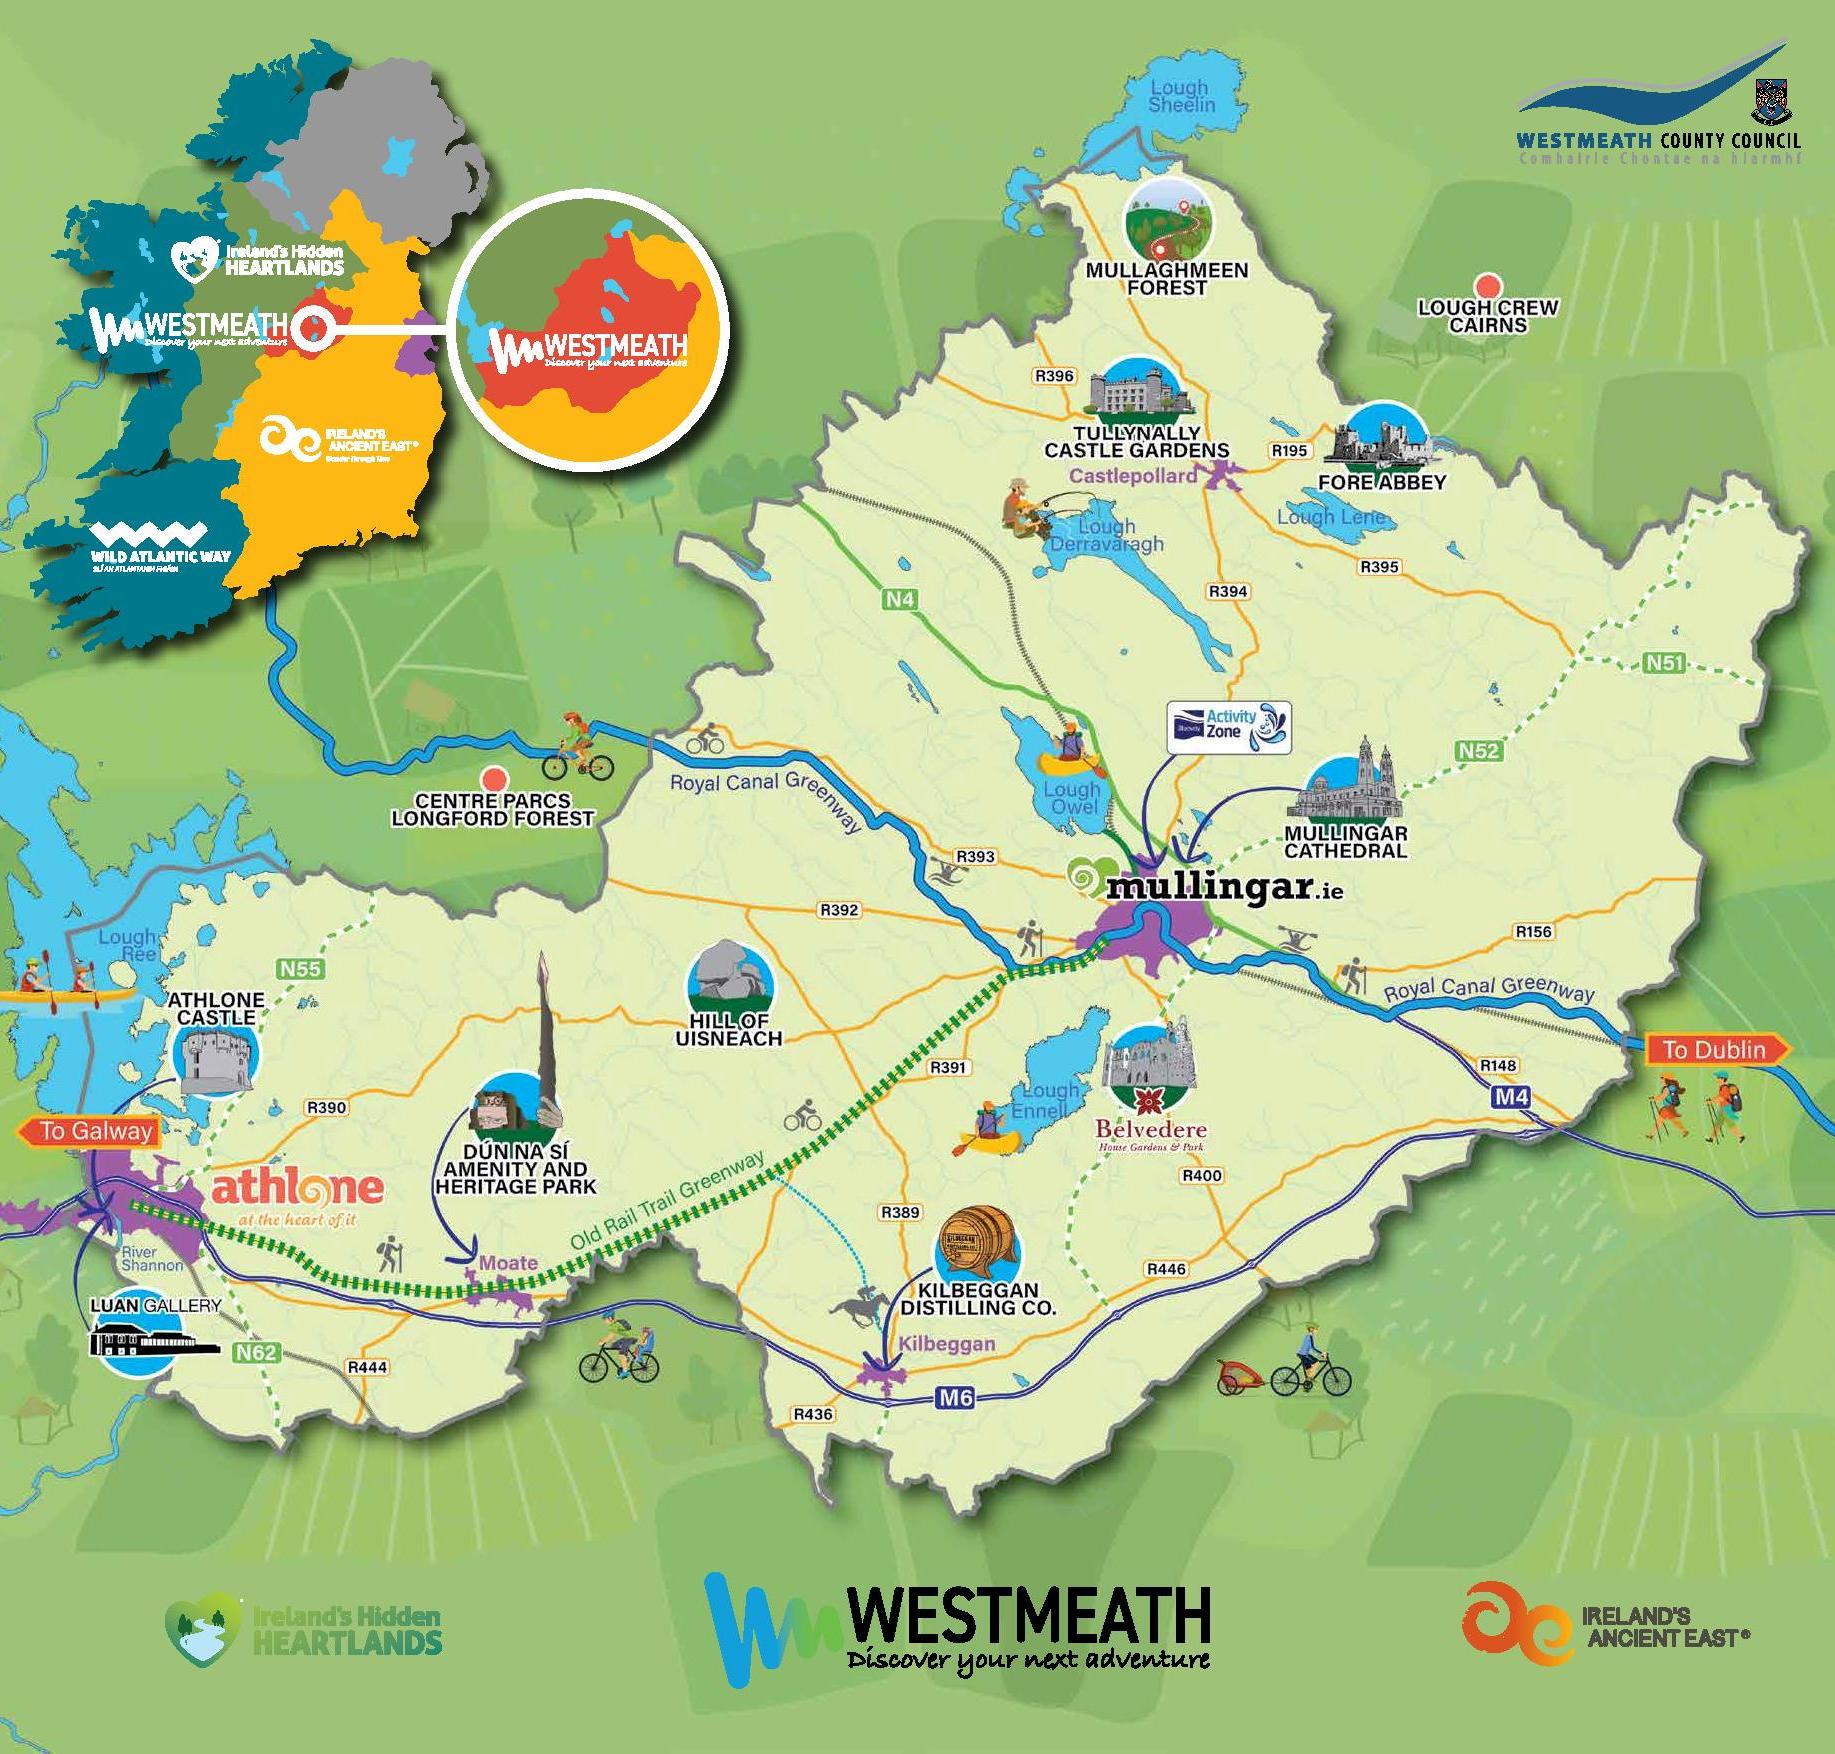 westmeath county council tourism